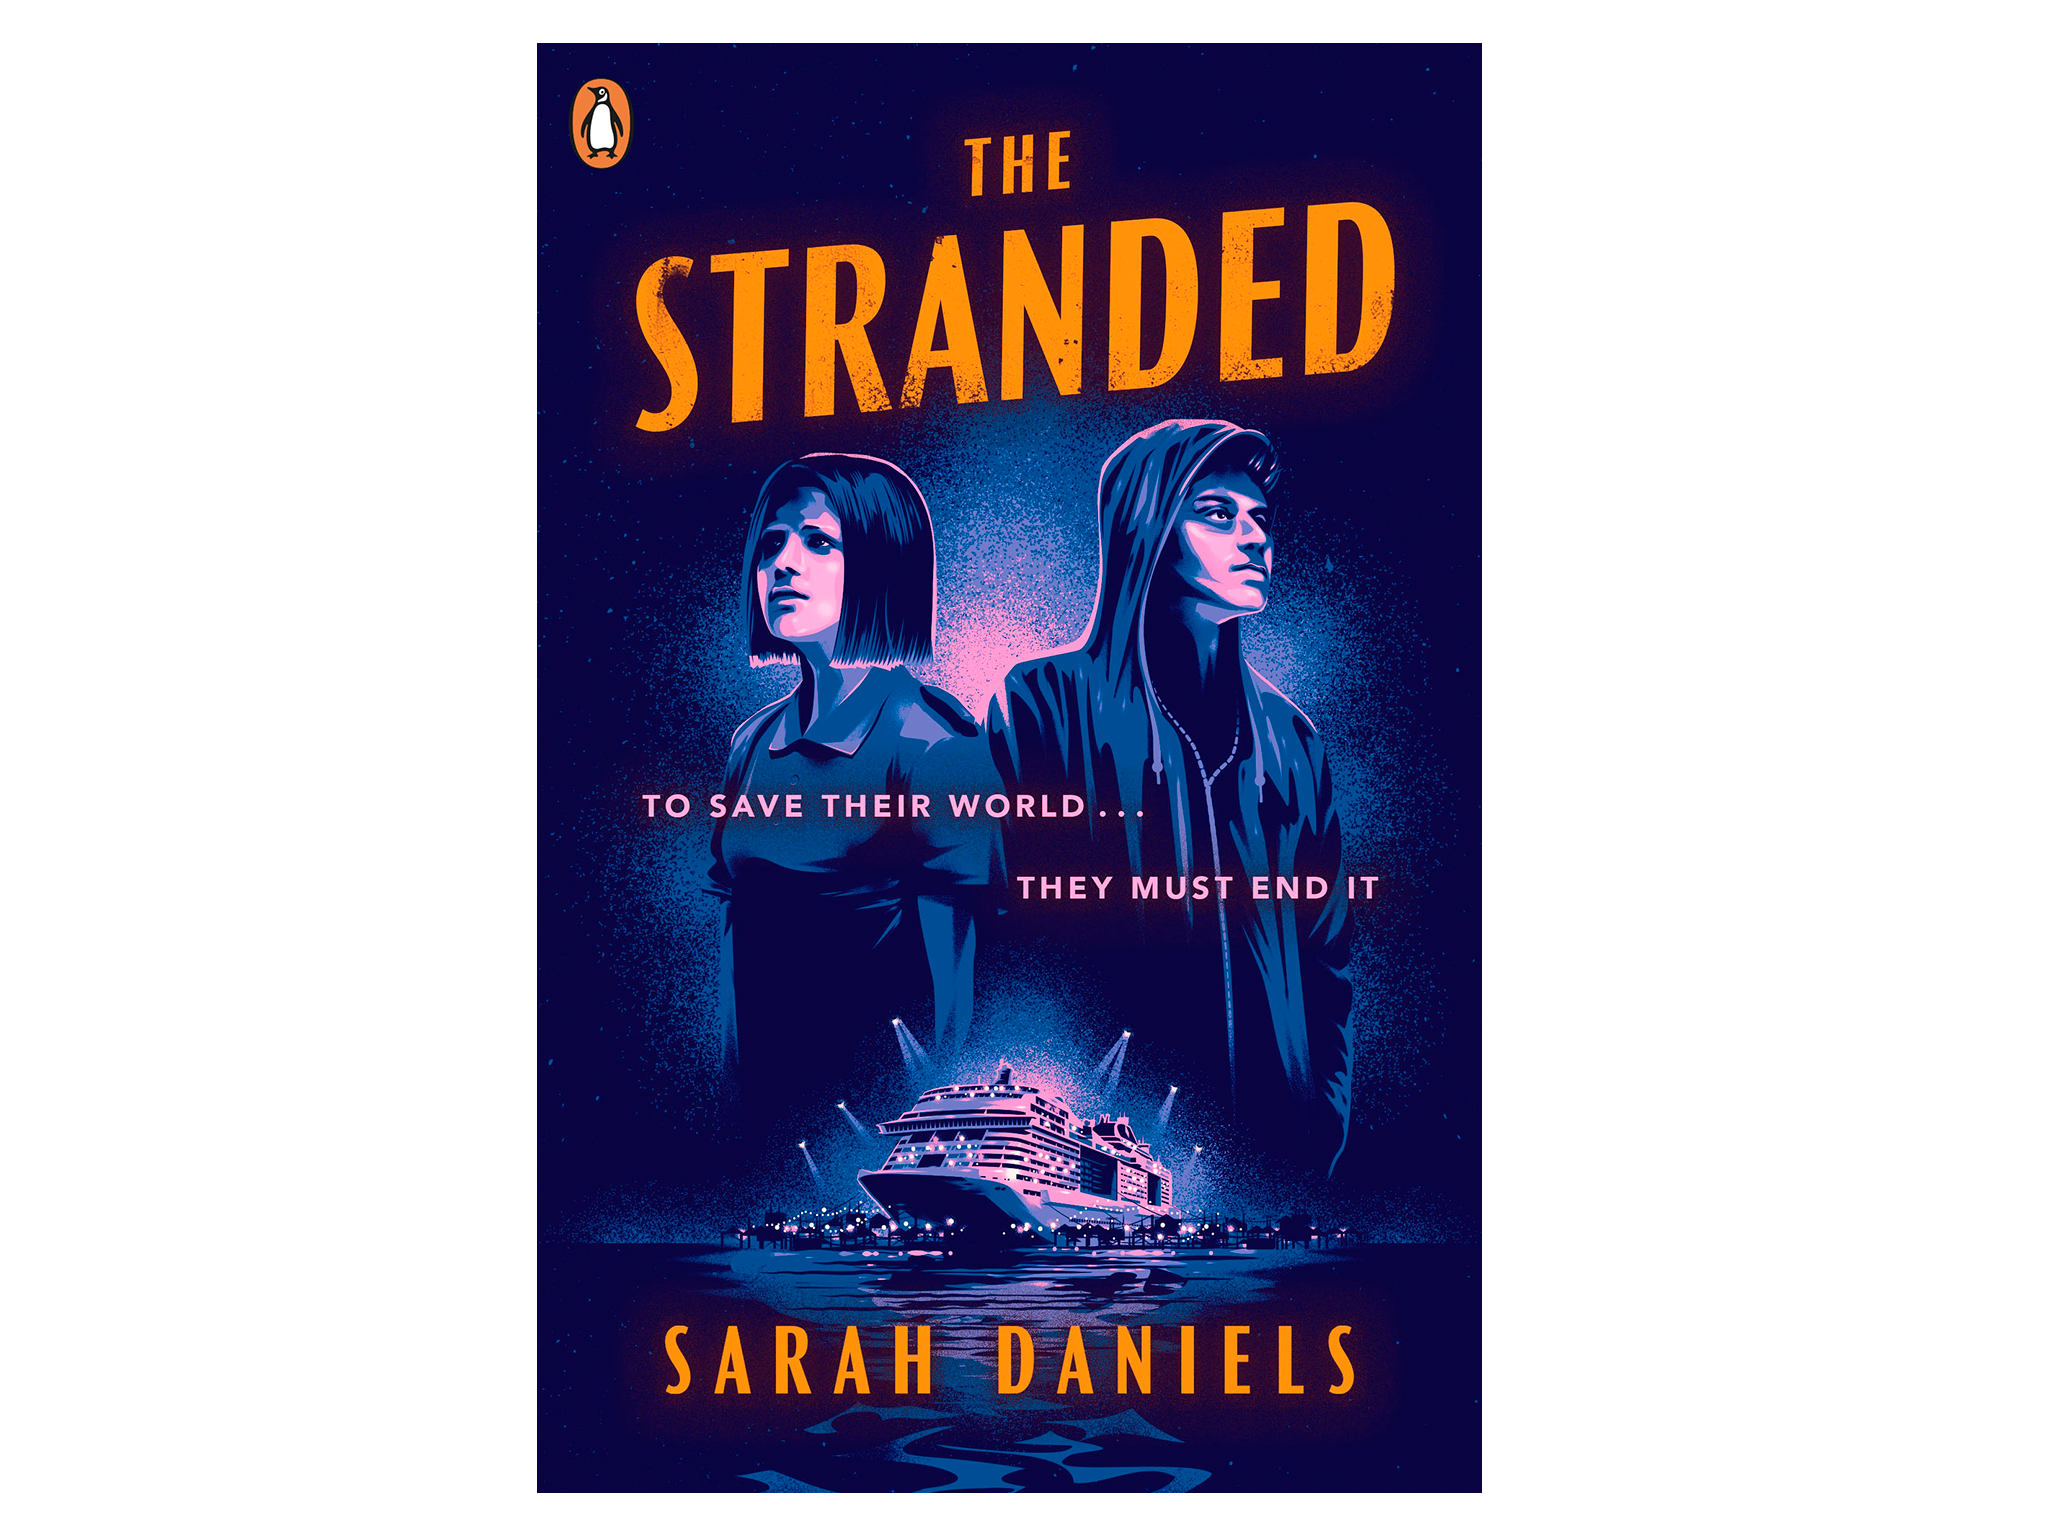 The stranded by Sarah Daniels